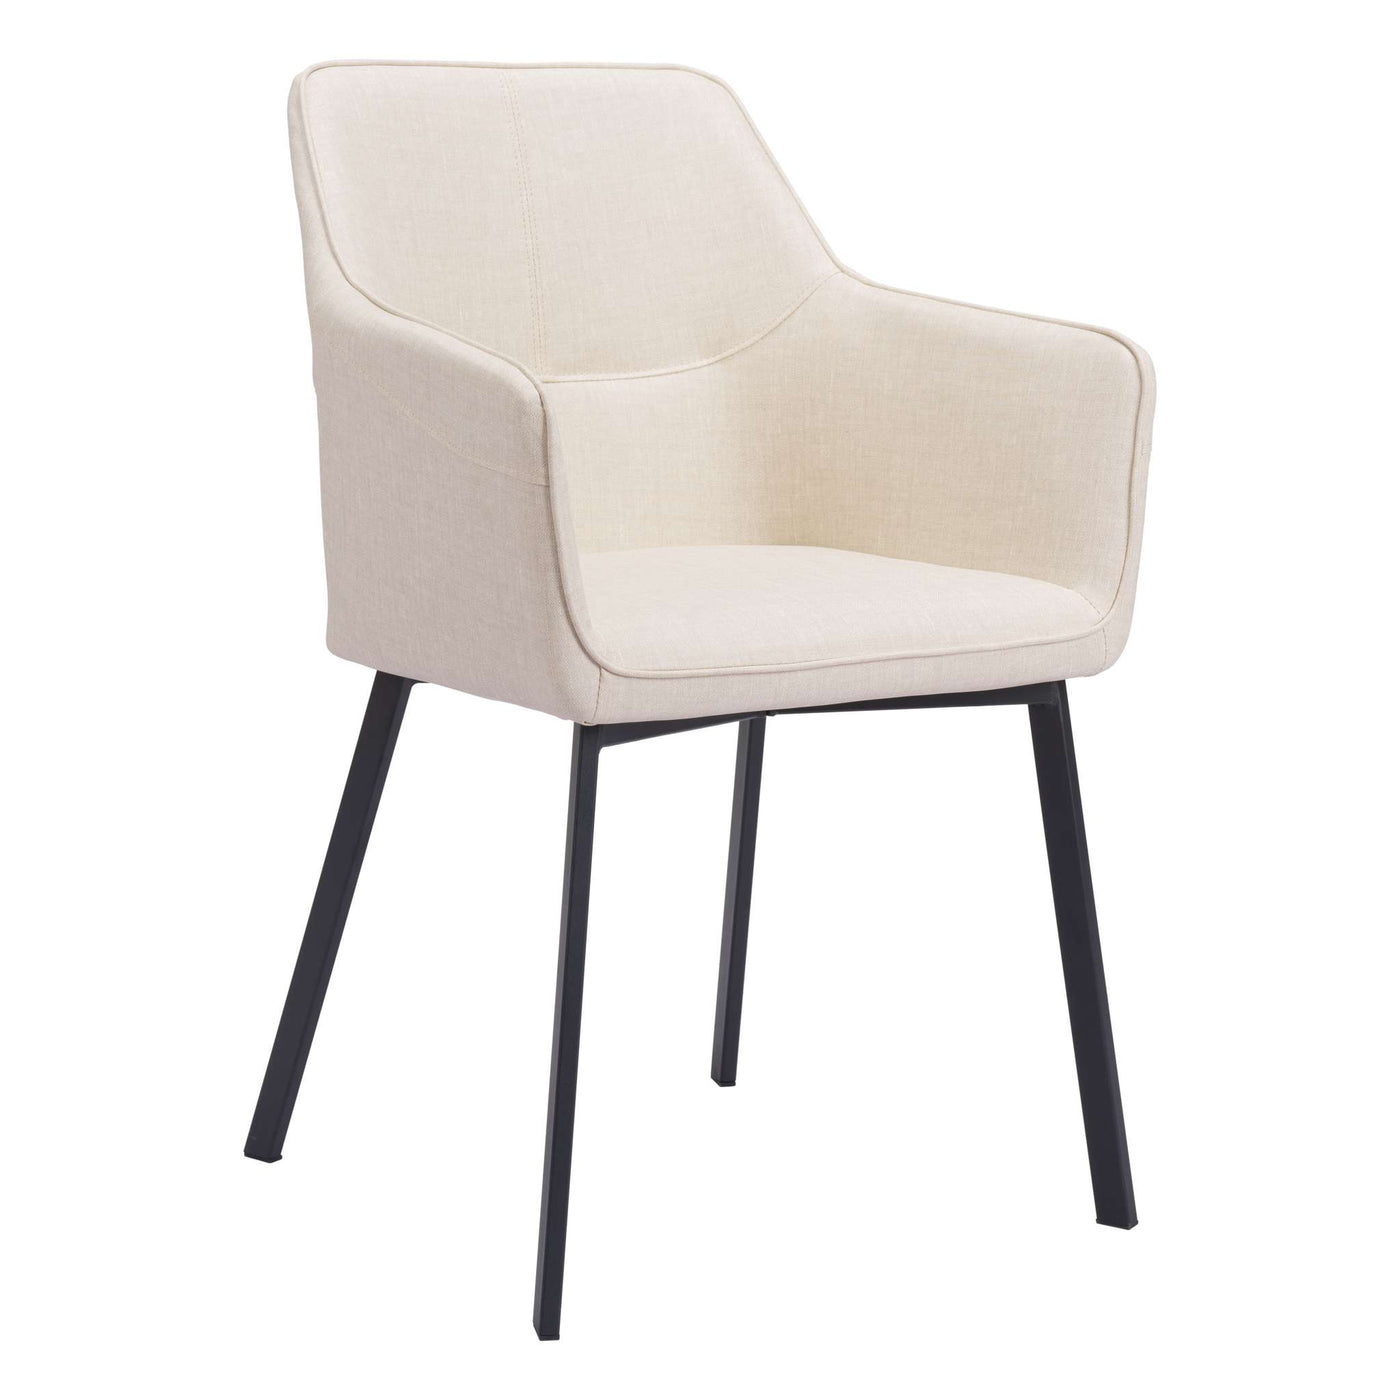 Zuo Mod Adage Dining Chair